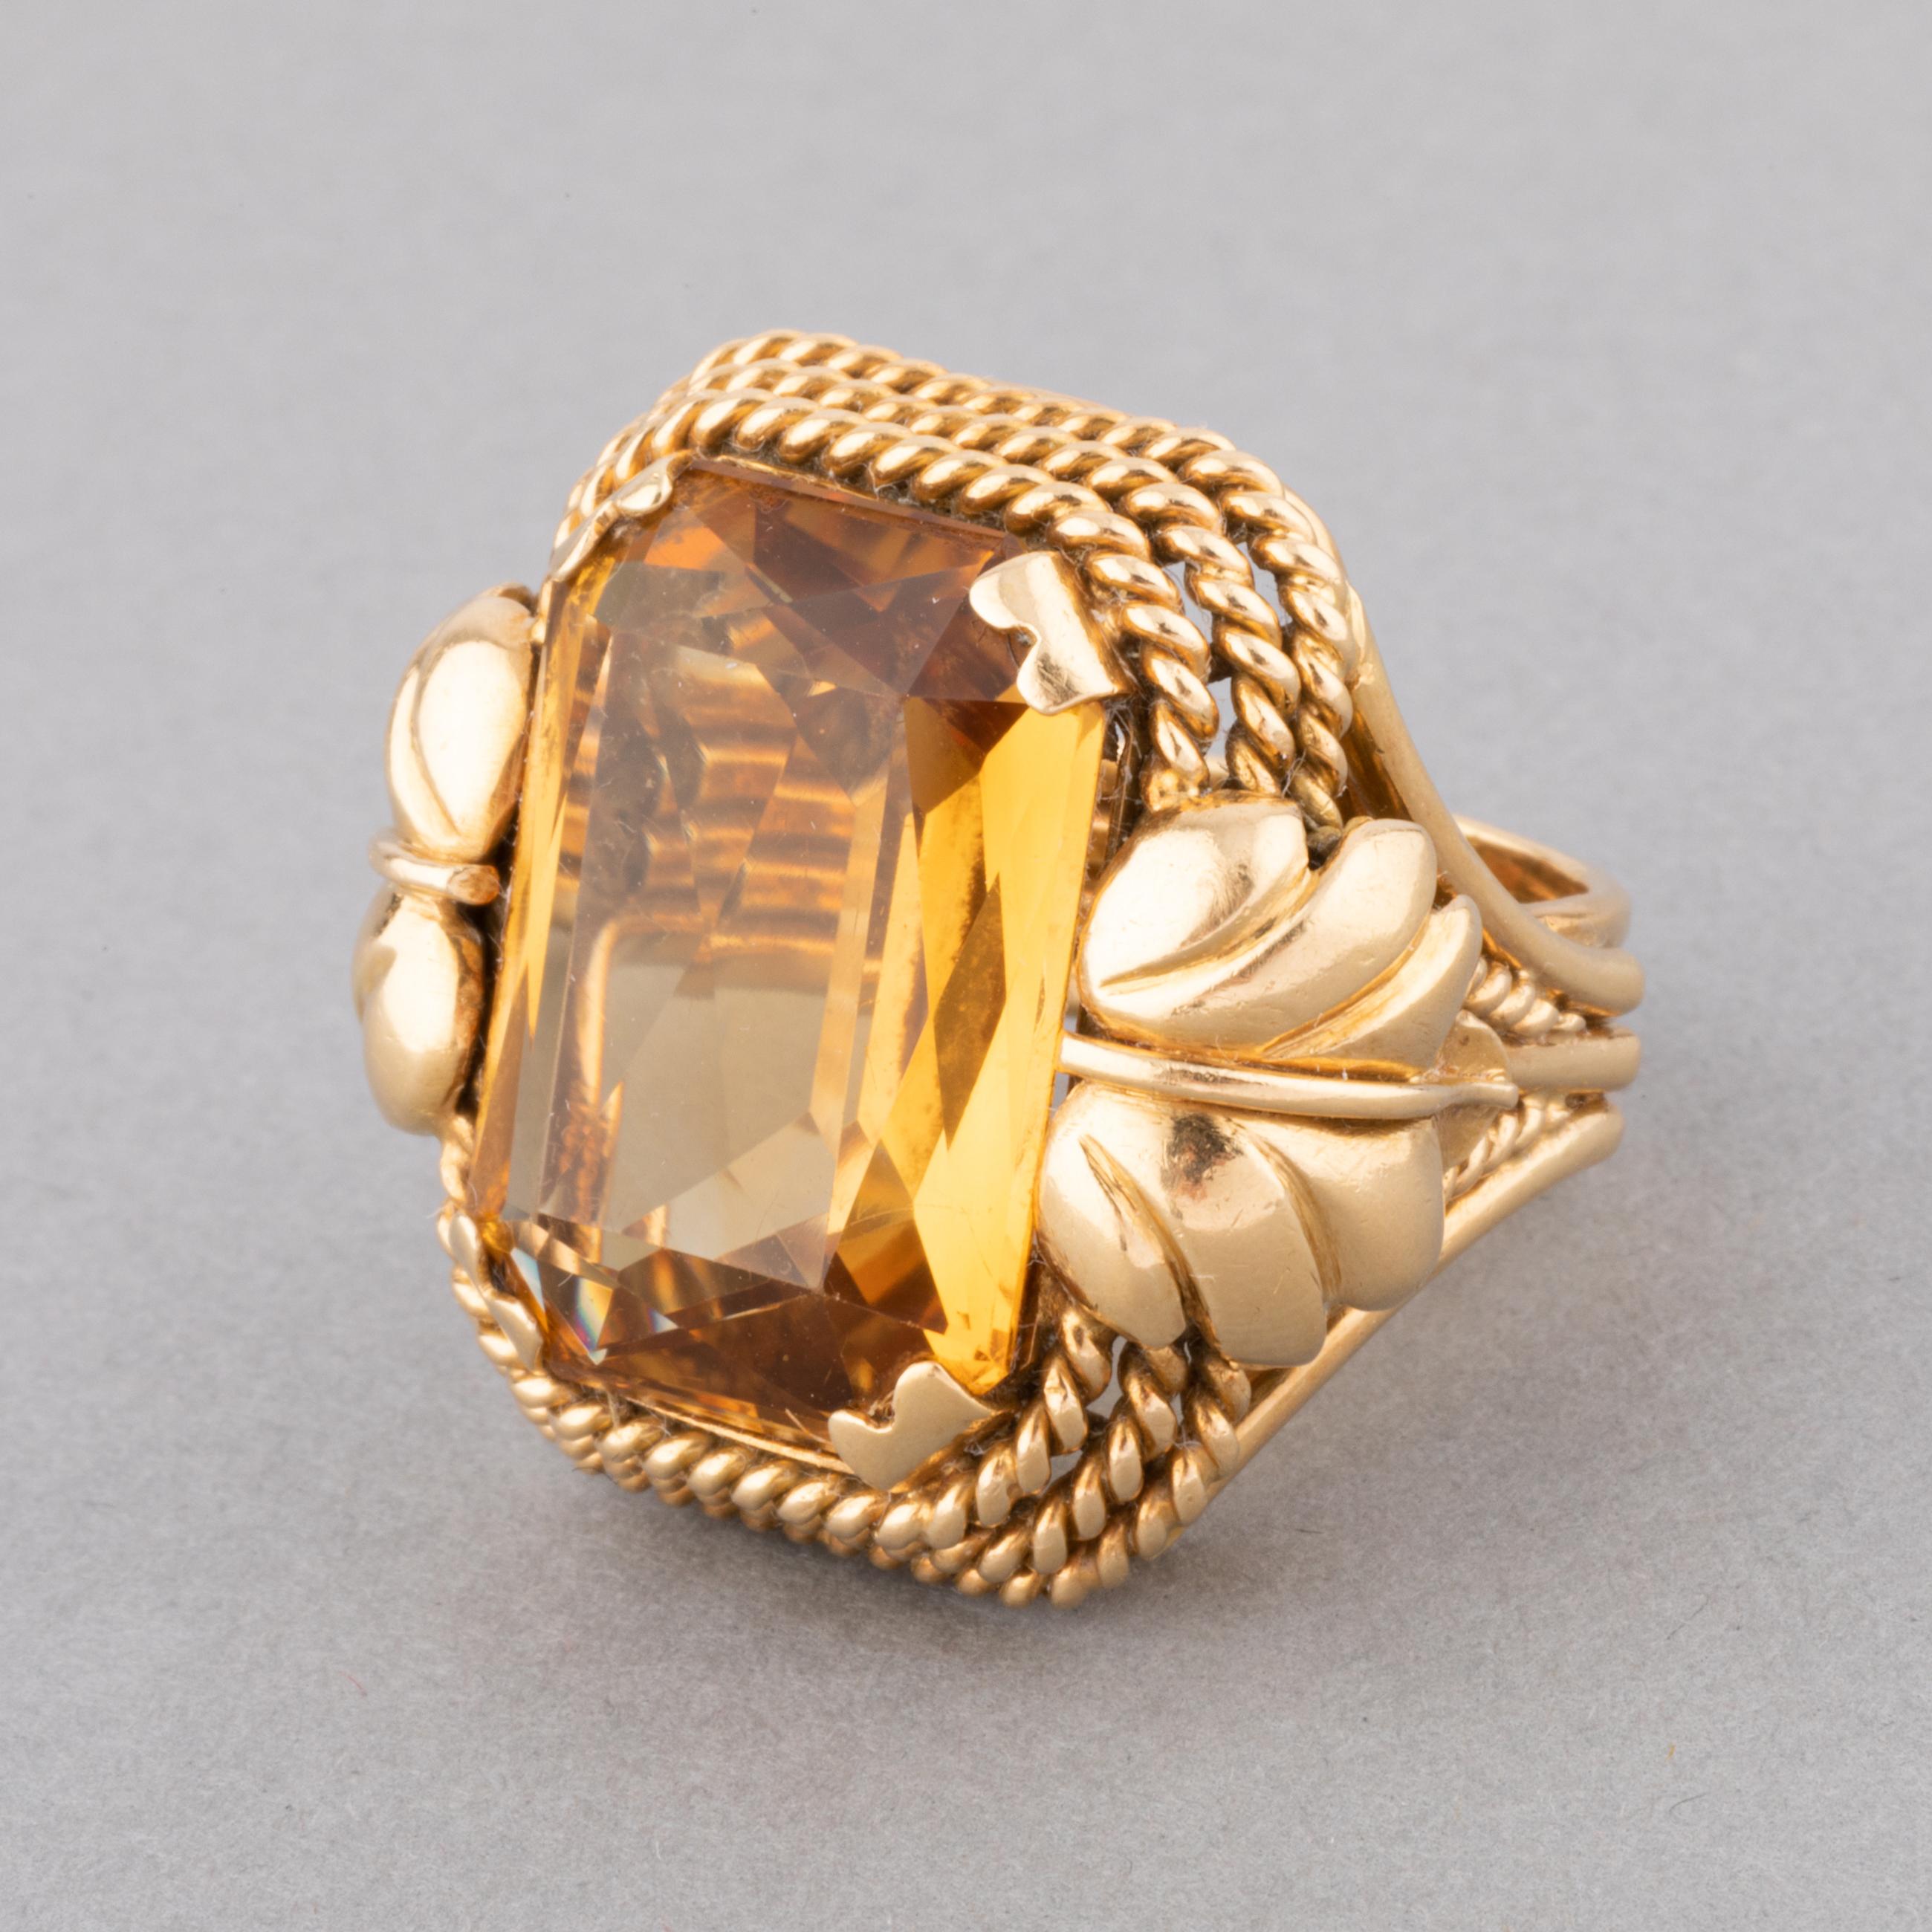 A lovely retro ring, made in France circa 1955.
Made in yellow gold 18k, it is big model. The front part measures 27 and 26 mm. 
The citrine weights approximately 15 carats.
Ring size is 50 or 5.25 USA, possible yo resize some.
Total weight 18.20